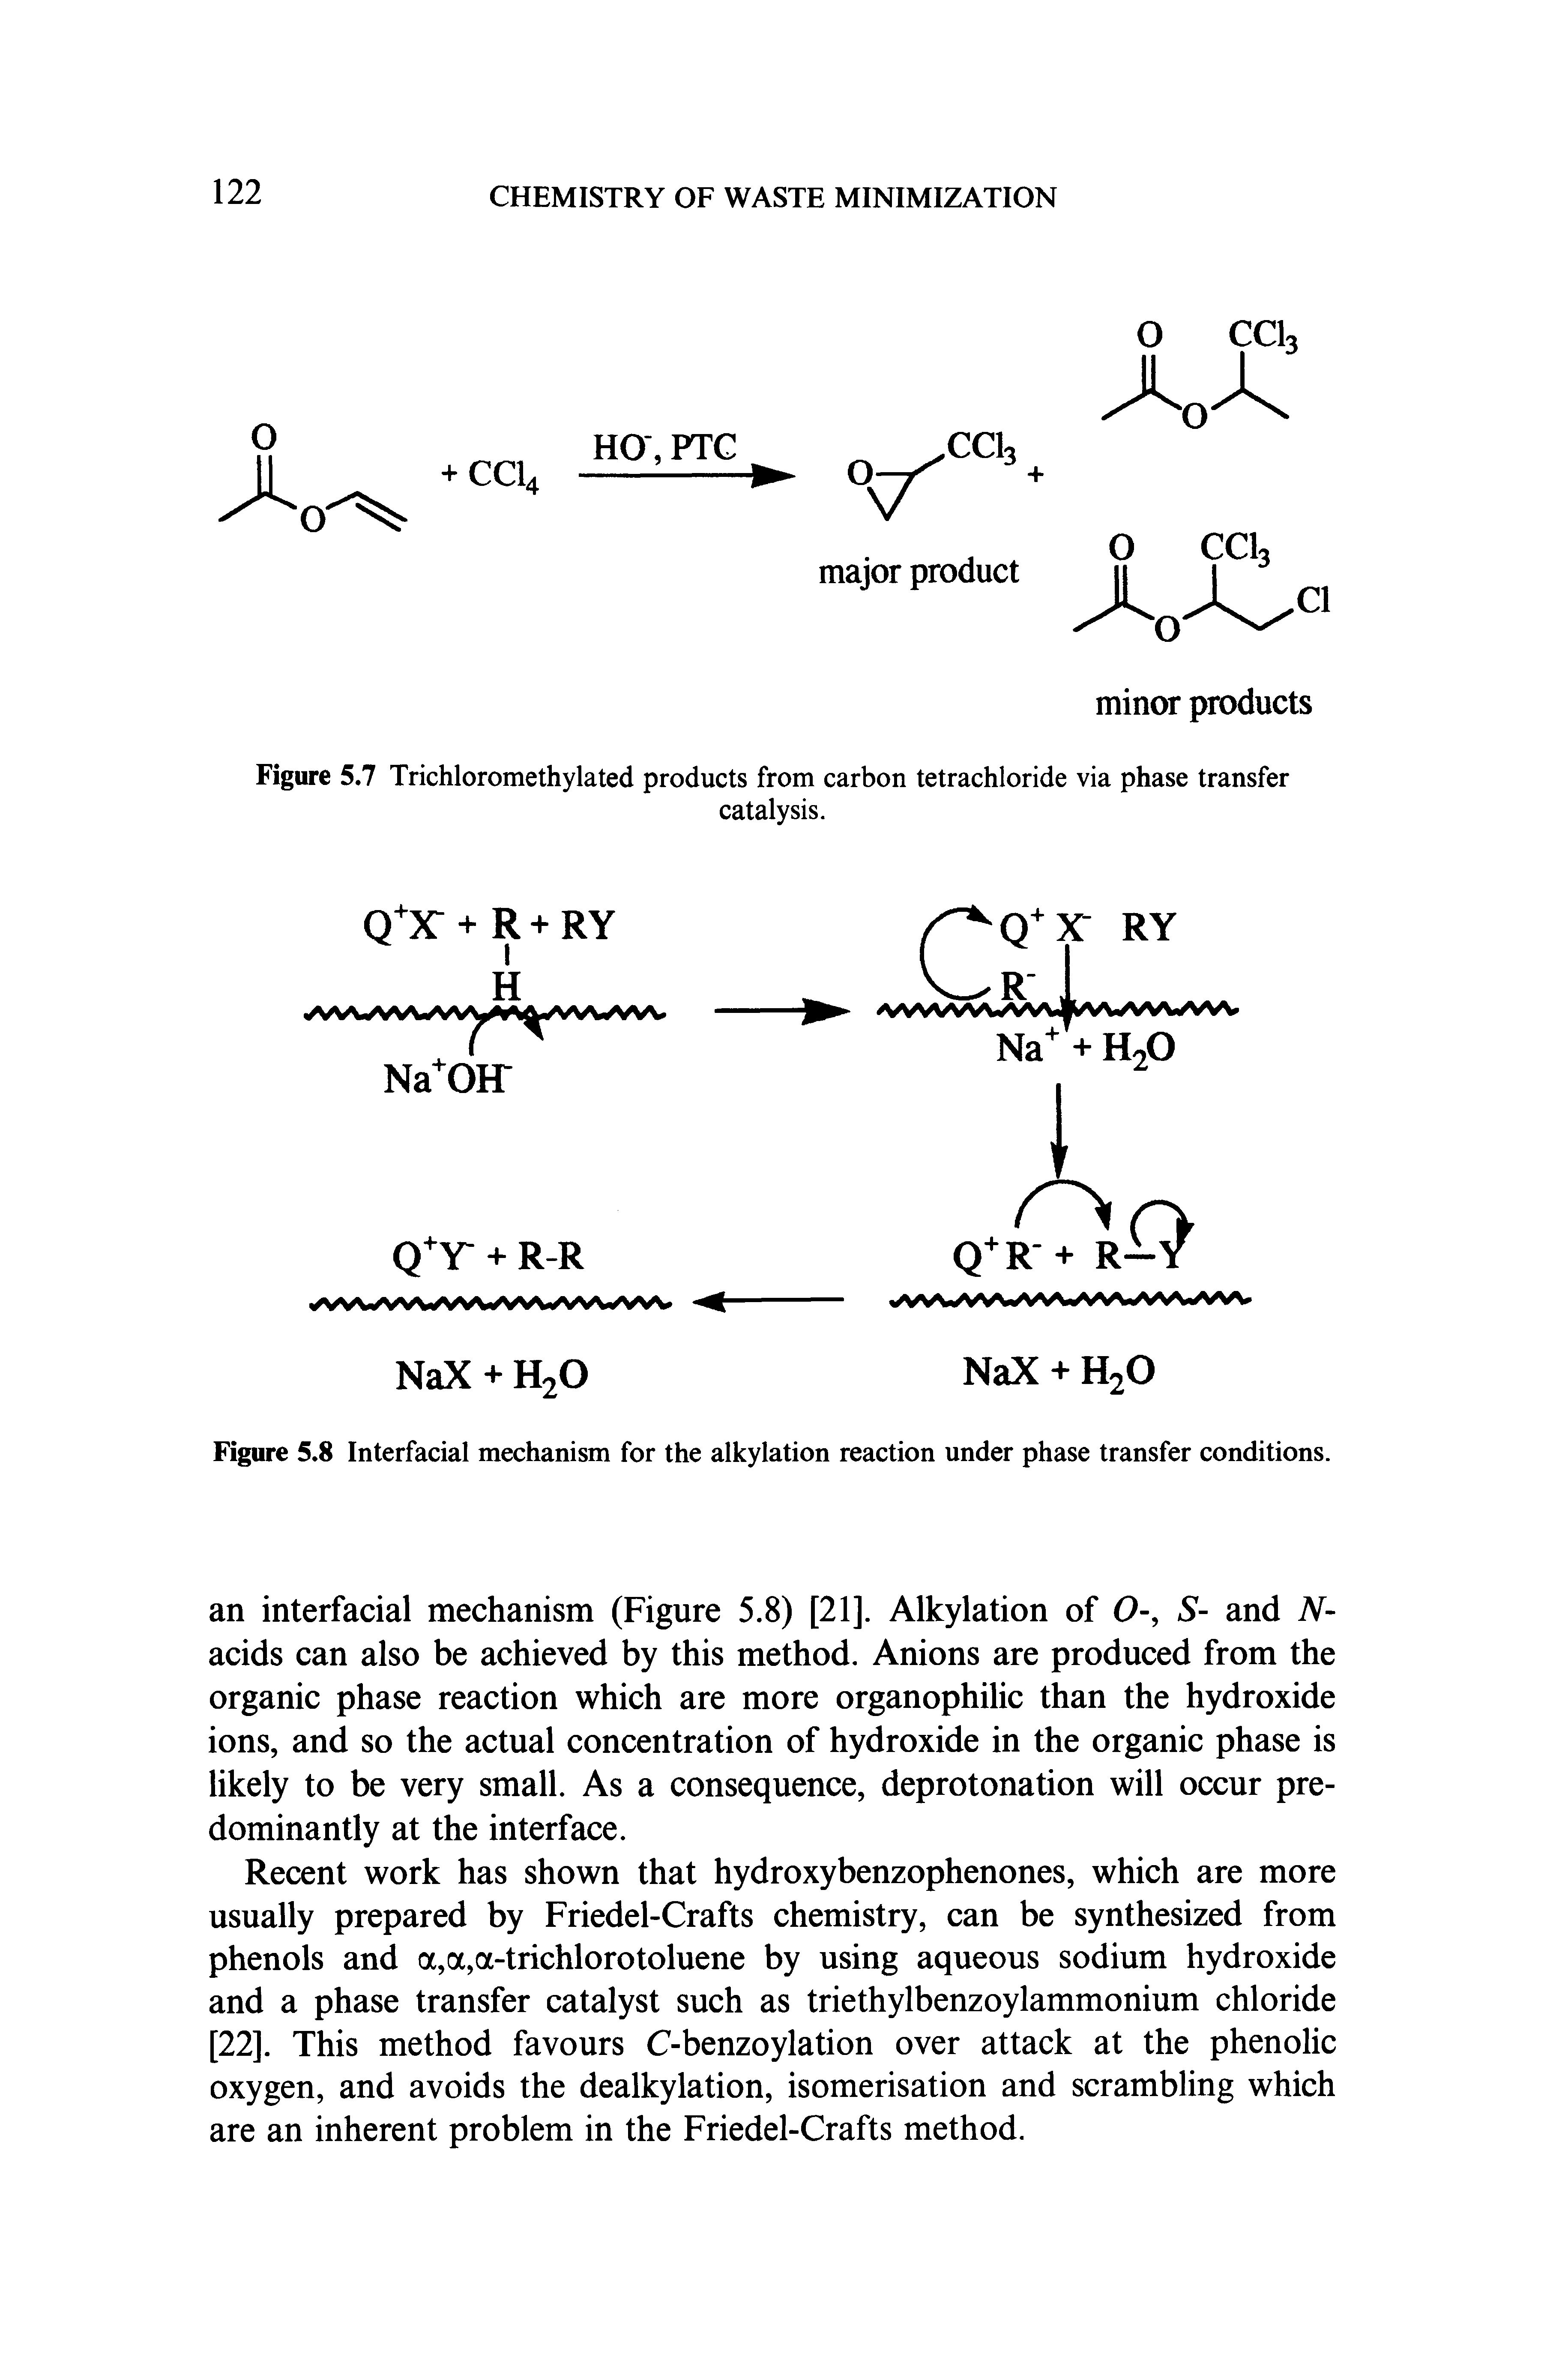 Figure 5.8 Interfacial mechanism for the alkylation reaction under phase transfer conditions.